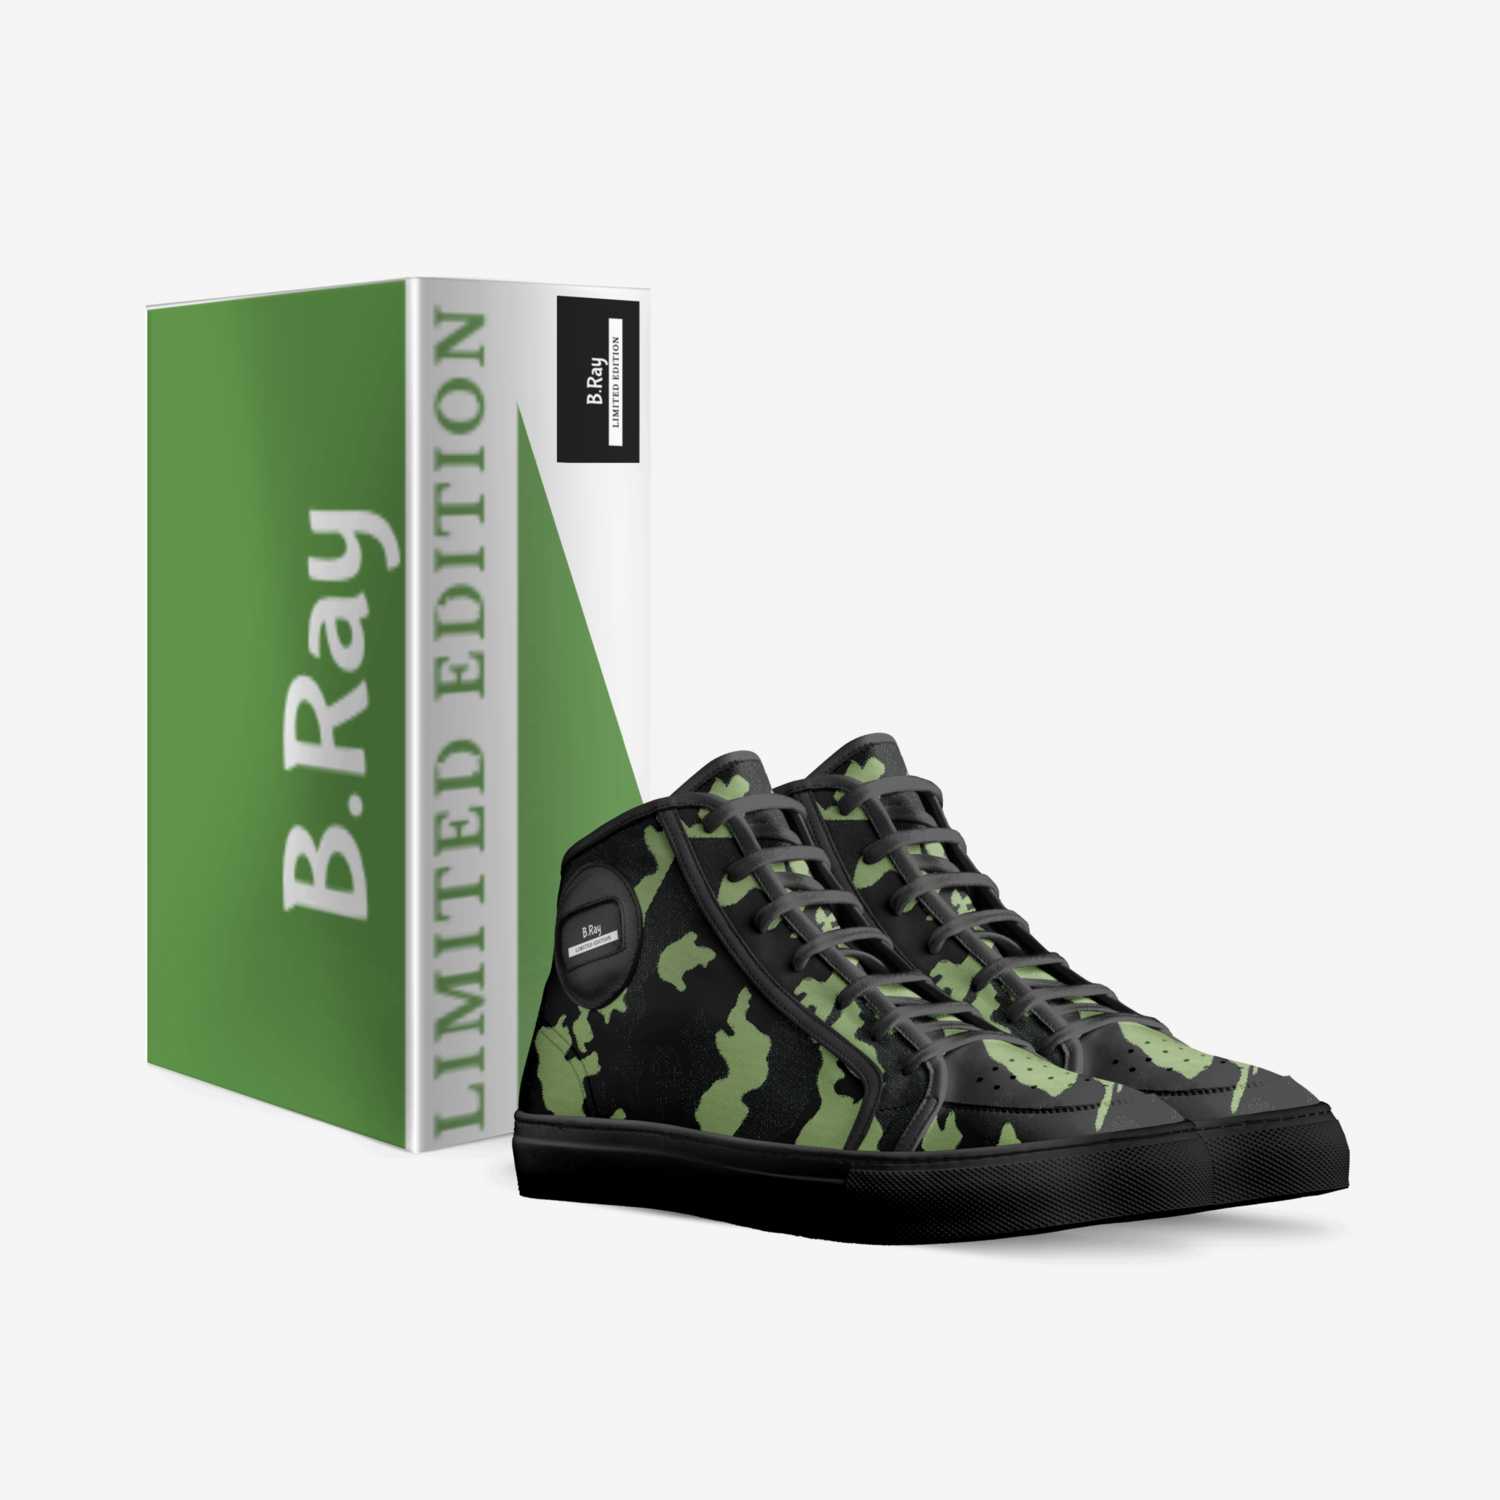 B.Ray custom made in Italy shoes by Majestic | Box view